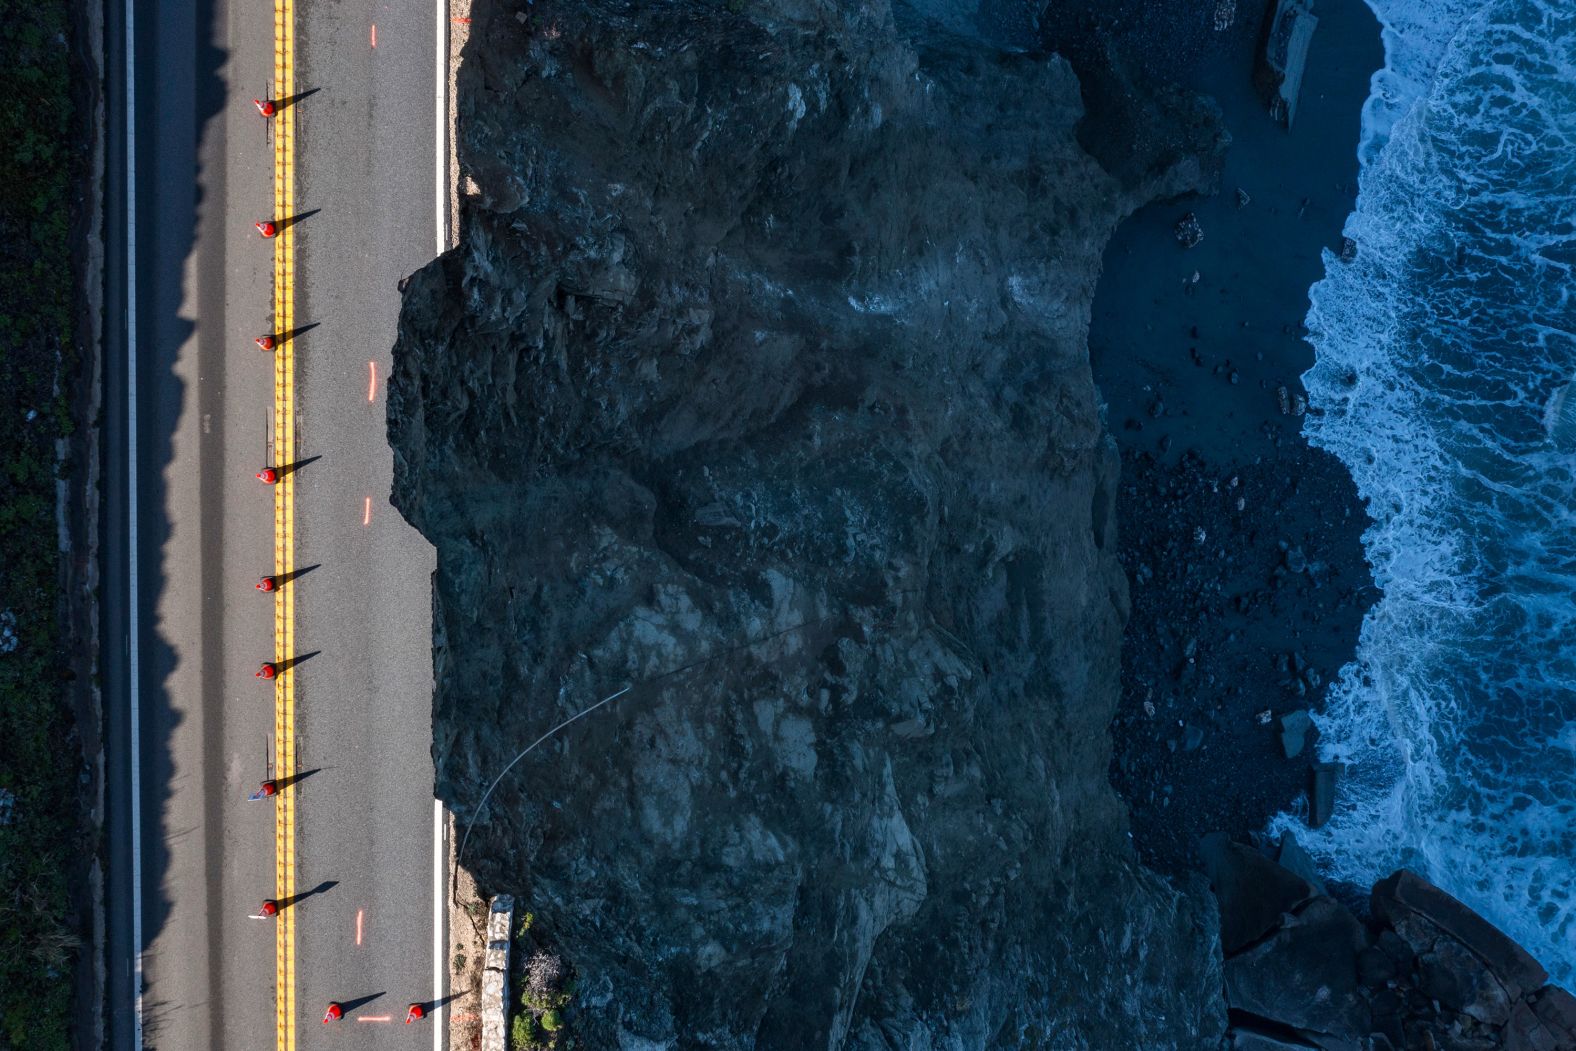 This aerial photo, taken on Monday, April 1, shows a break in the southbound lane of Highway 1 after <a href="index.php?page=&url=https%3A%2F%2Fwww.cnn.com%2Ftravel%2Fcalifornia-highway-1-damage-big-sur%2Findex.html" target="_blank">part of a cliff gave way</a> in Big Sur, California, over the weekend.